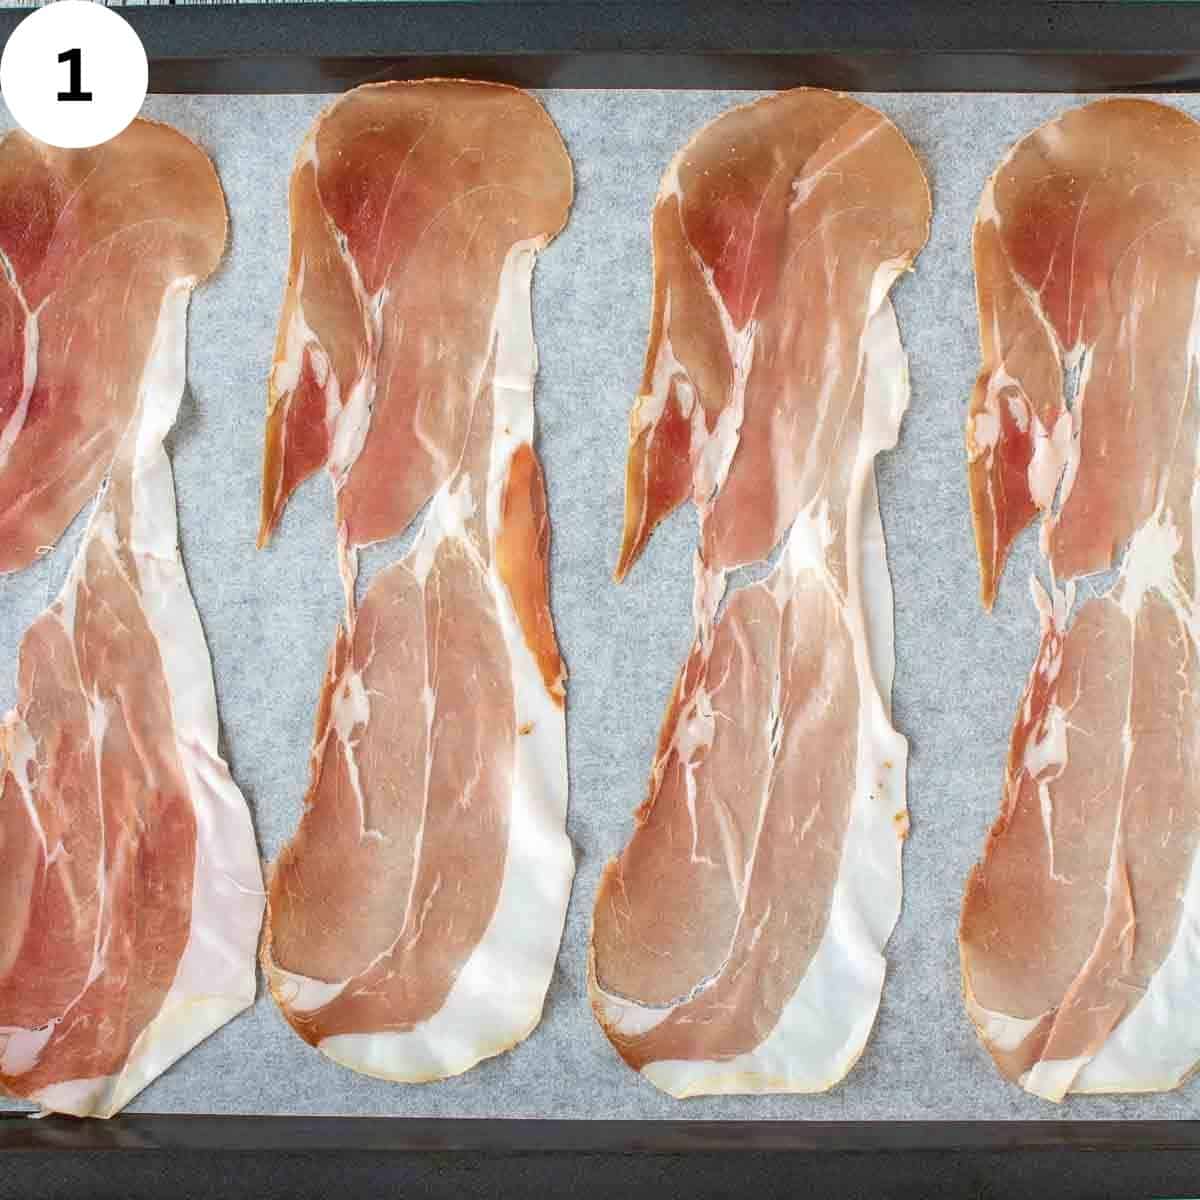 Slices of prosciutto on a parchment paper.